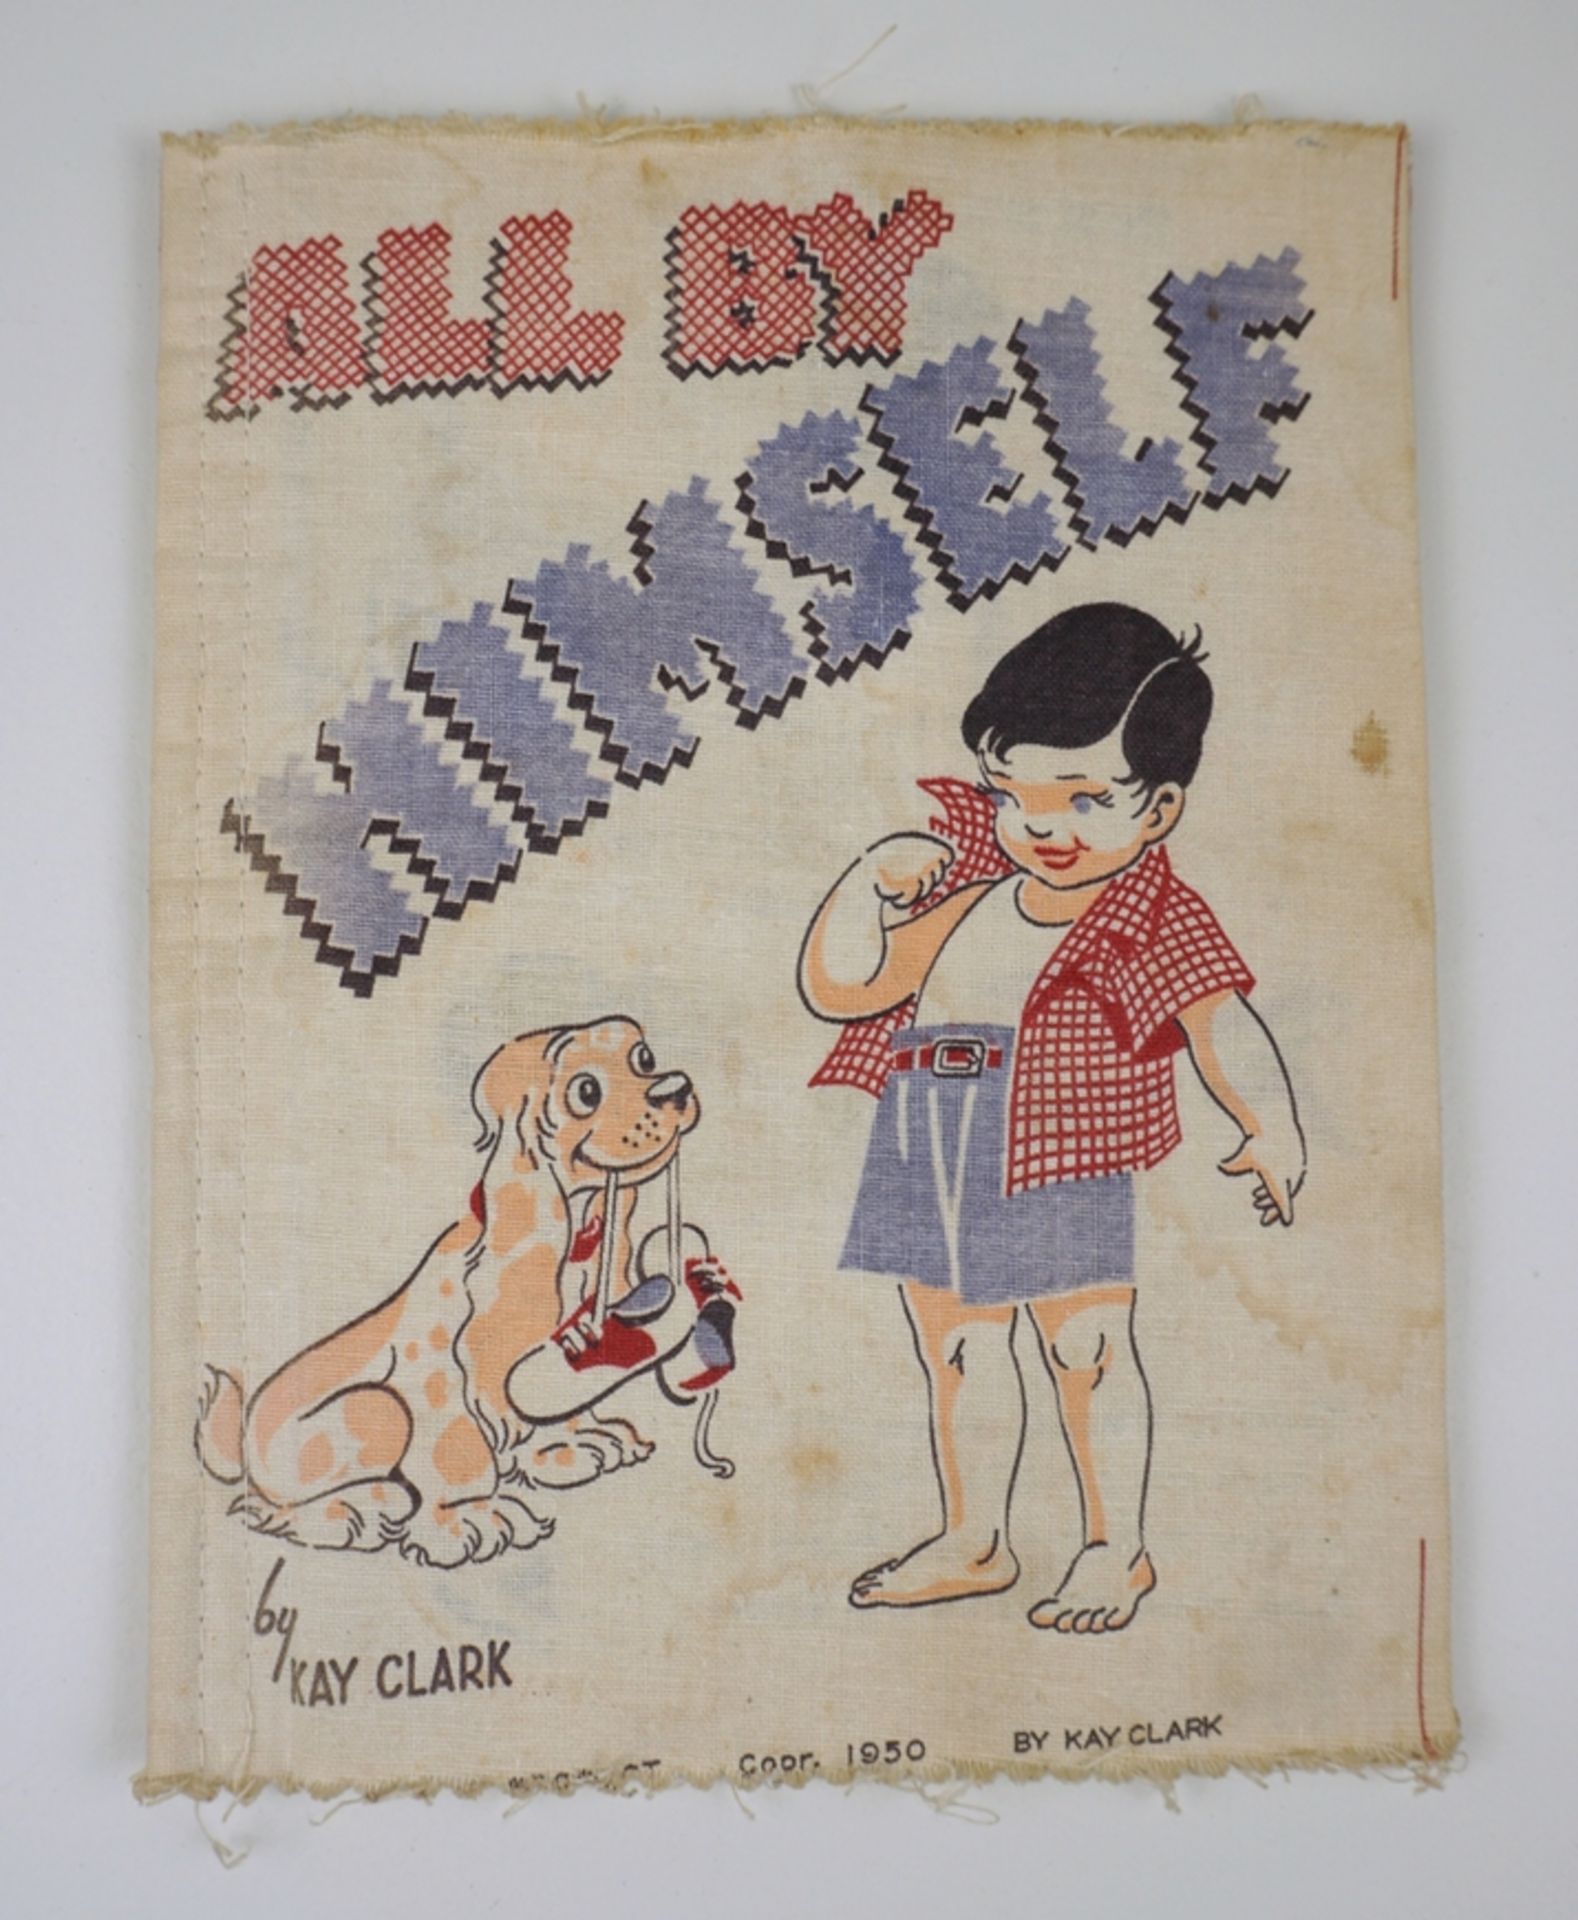 Kay Clark "All by Himself", Stoff-Lernbuch für Kinder, Plakie Product, Youngstown, Ohio, 1950